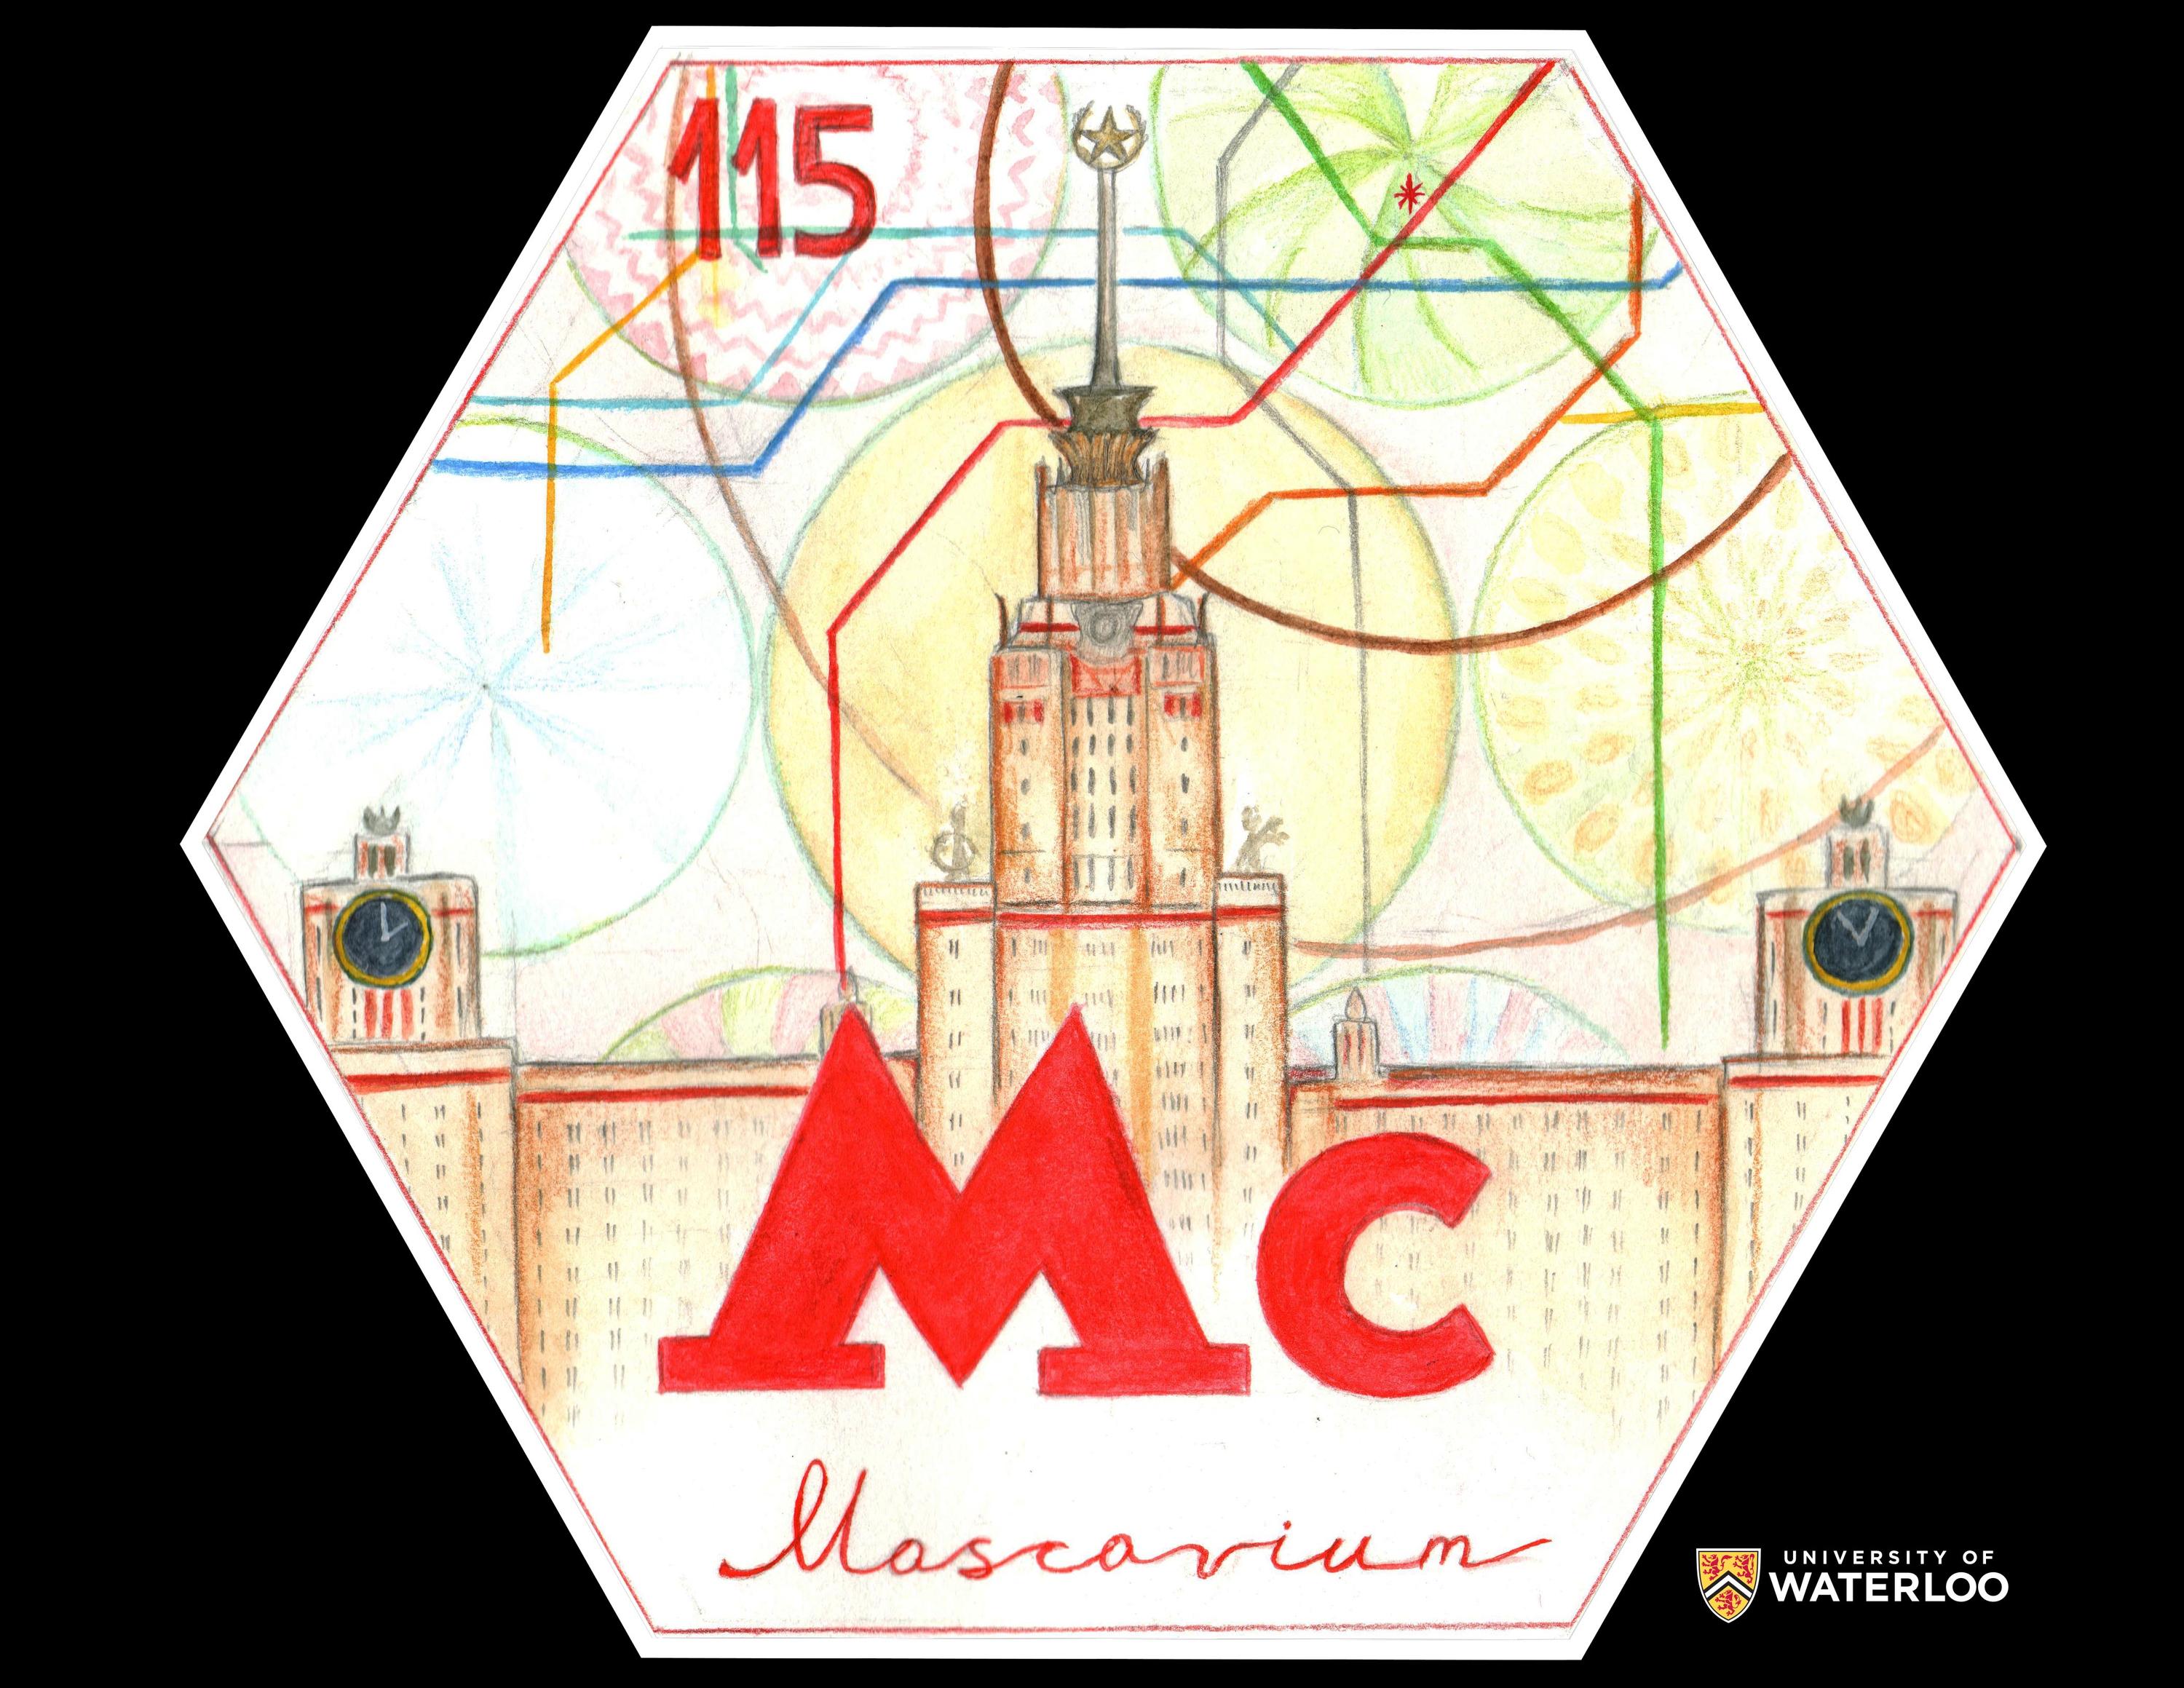 Coloured pencil on paper. Centre is the chemical symbol “Mc” in an art deco font. Below “Moscovium” in cursive. “115” appears in the upper left corner. The background features the main building of Lomonosov Moscow State University with coloured graphic circles and lines in the sky.